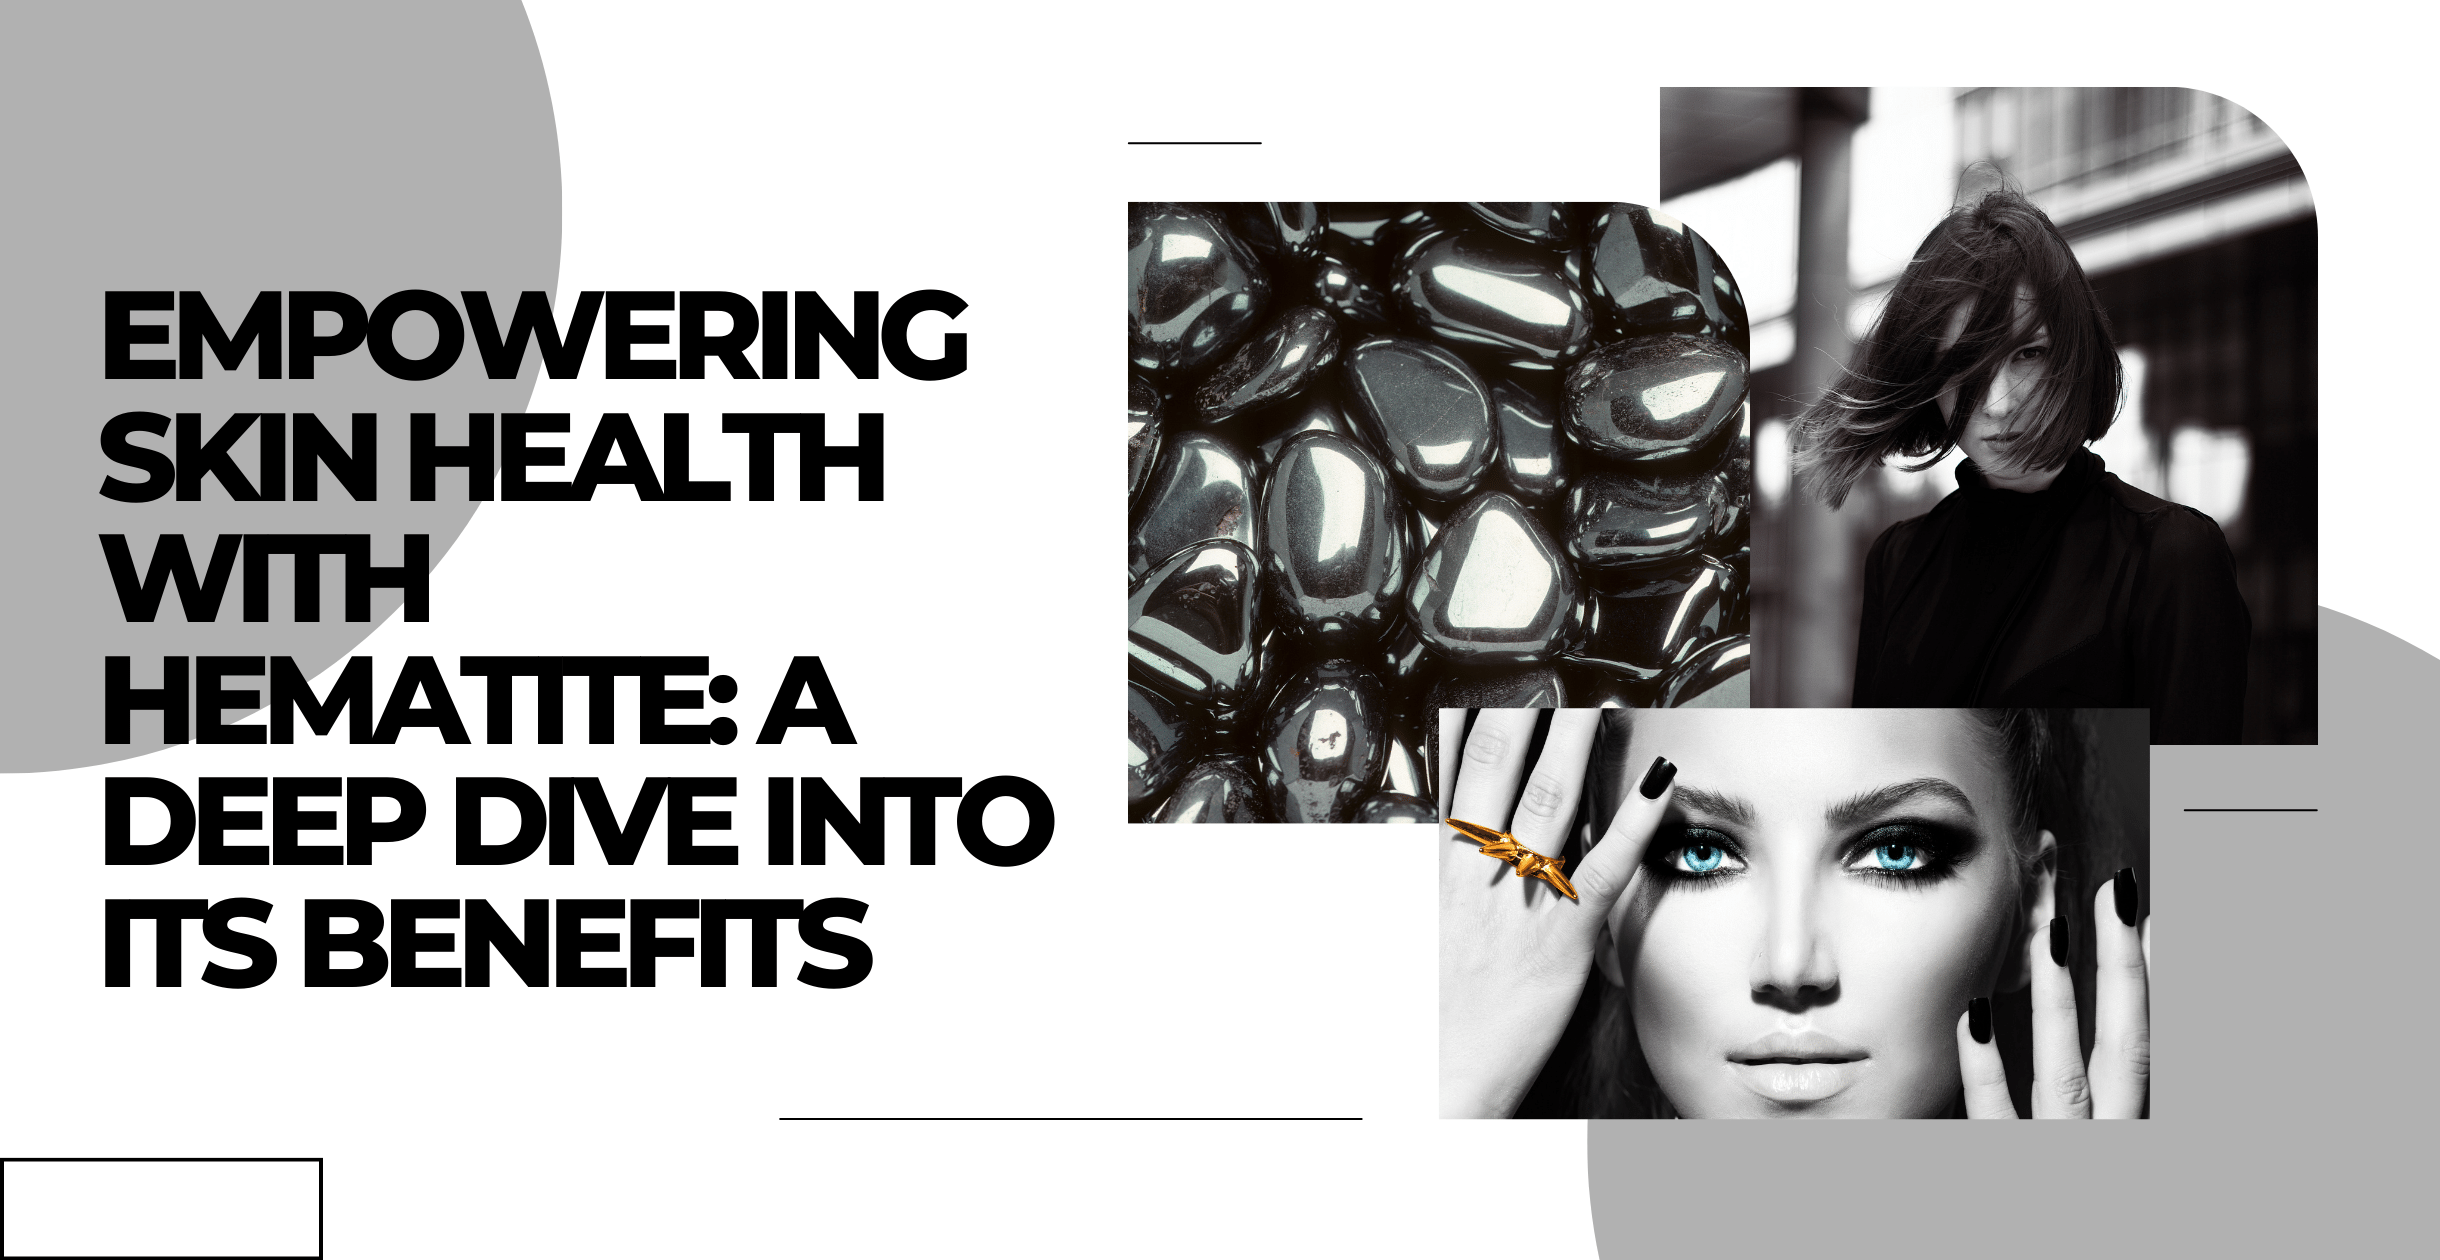 Empowering Skin Health with Hematite: A Deep Dive into its Benefits